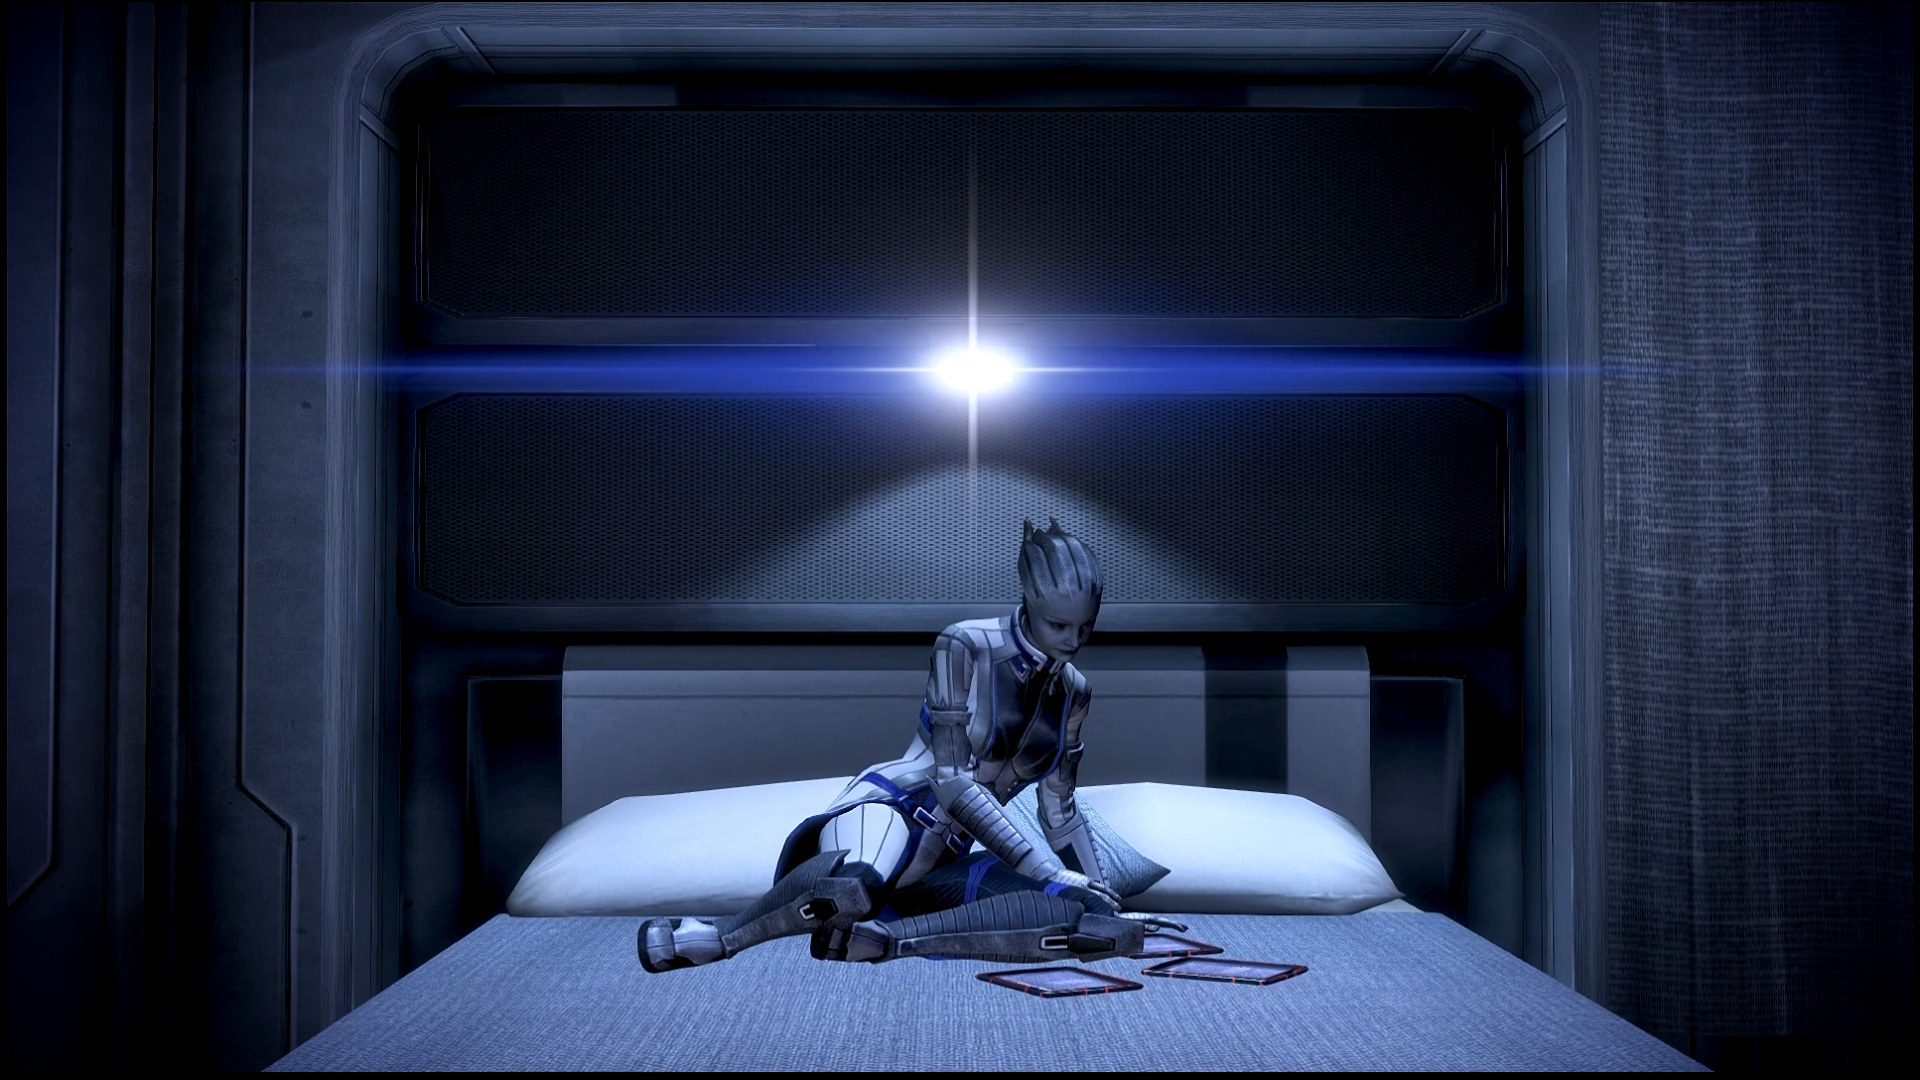 Mass Effect Liara Studying Dreamscene By Droot1986